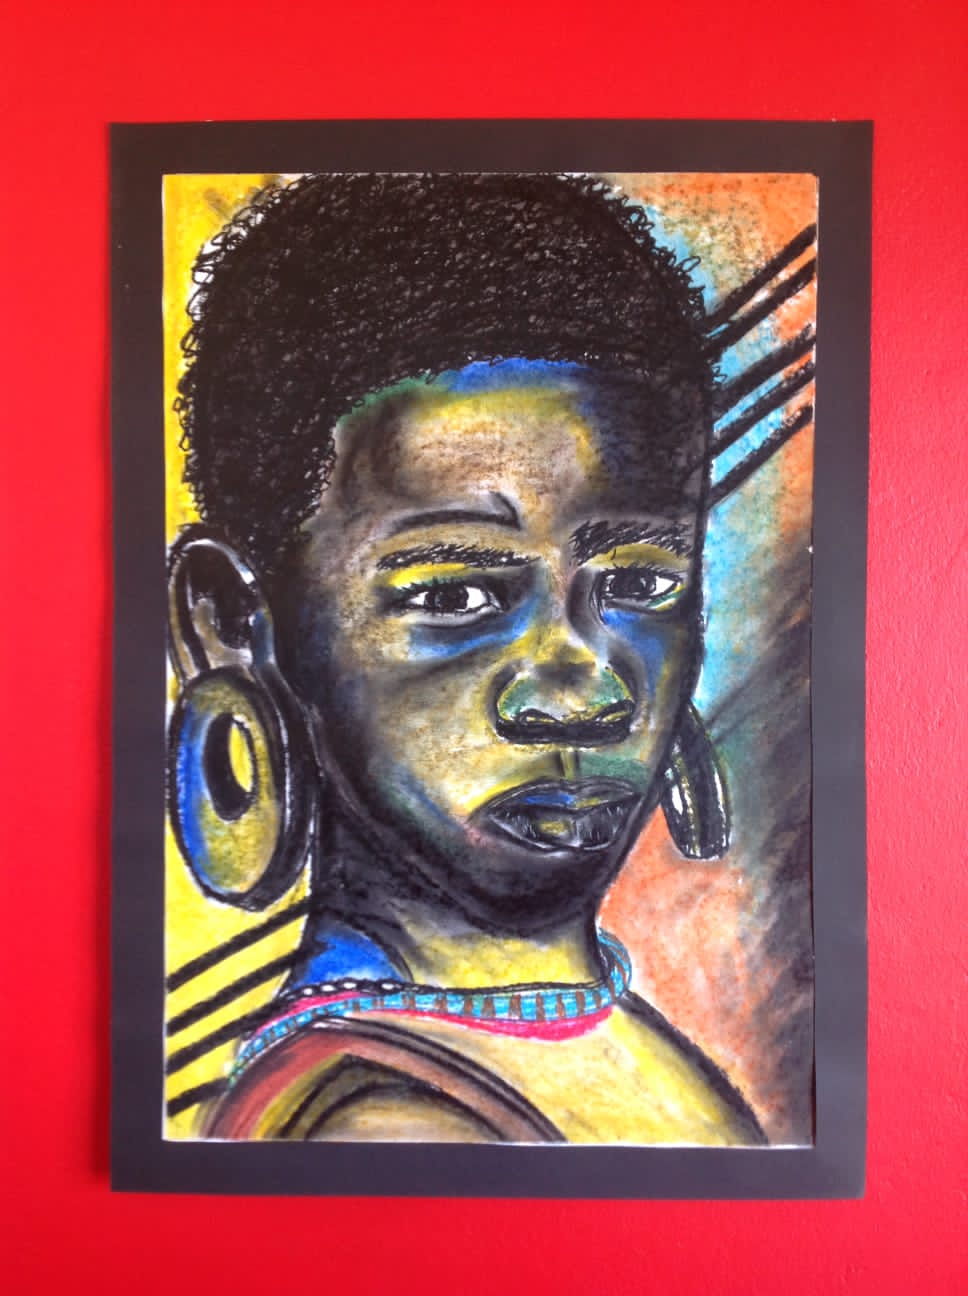 African child from a village of the Masai tribe. Bidding starts at R2000 excluding courier/shipping.